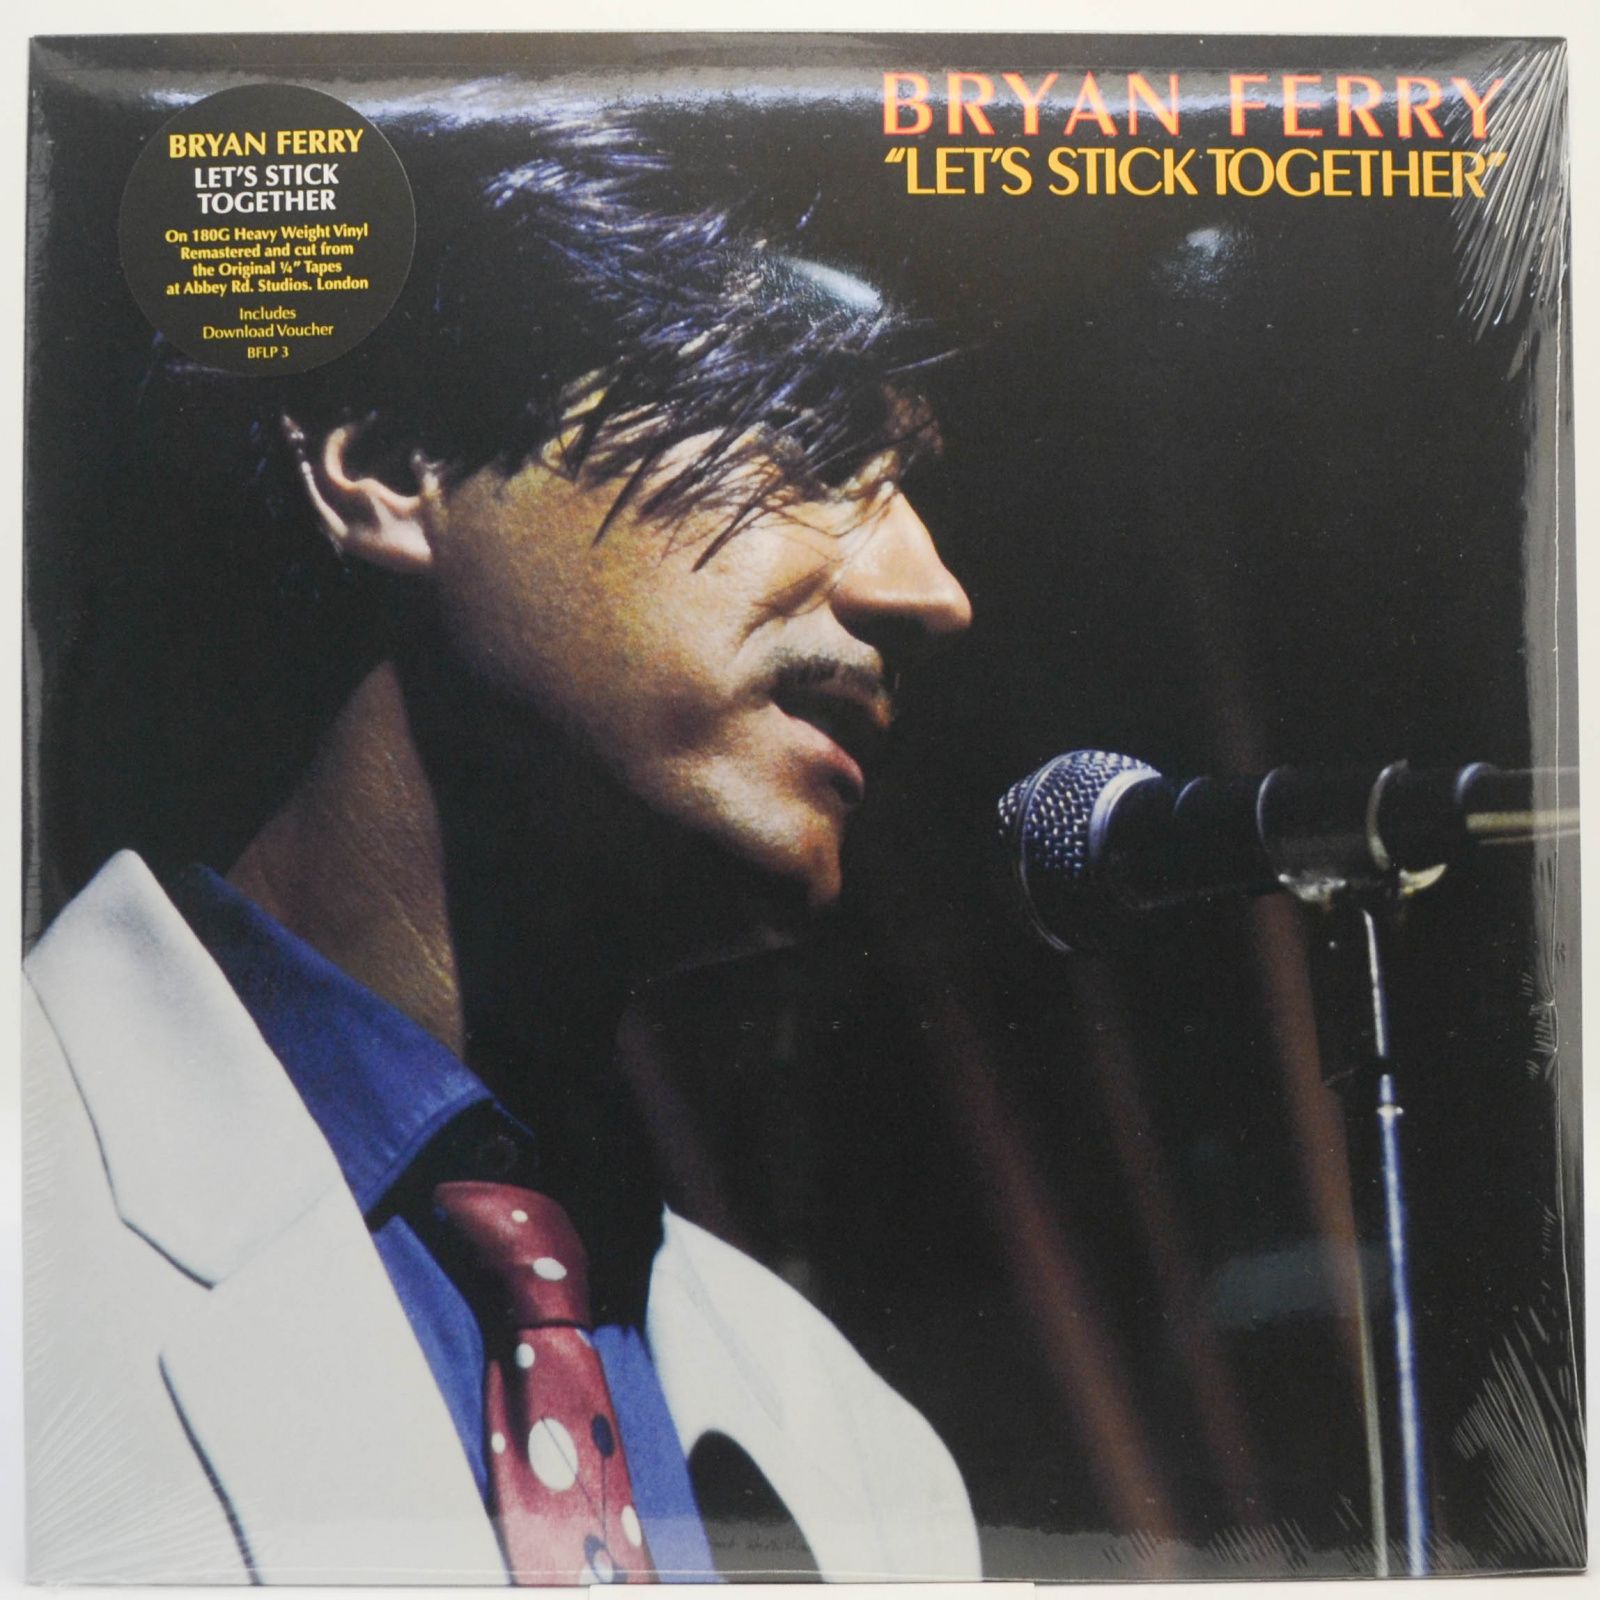 Bryan Ferry — Let's Stick Together, 1976